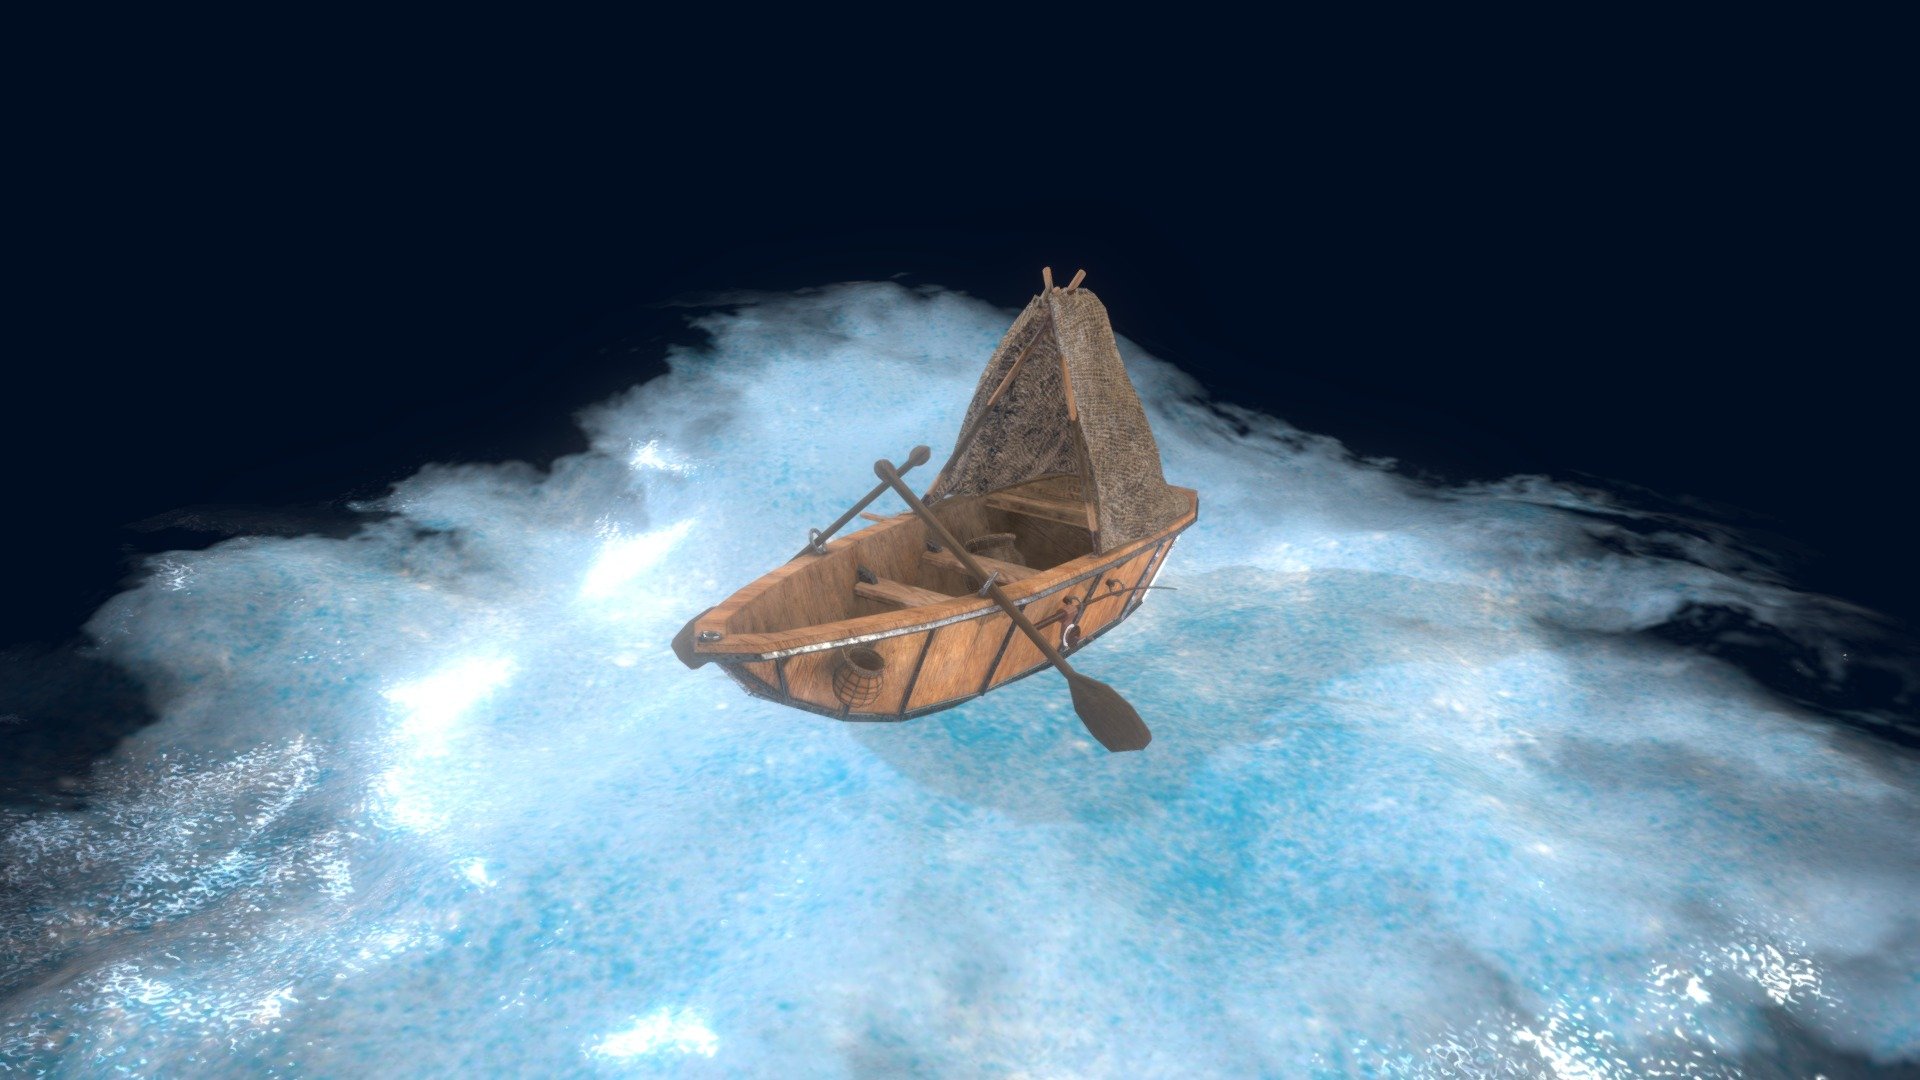 fishing boat 3D model made in blender with fishing rod , net , shade fishing hook ,boat paddle and fish pot 3d model